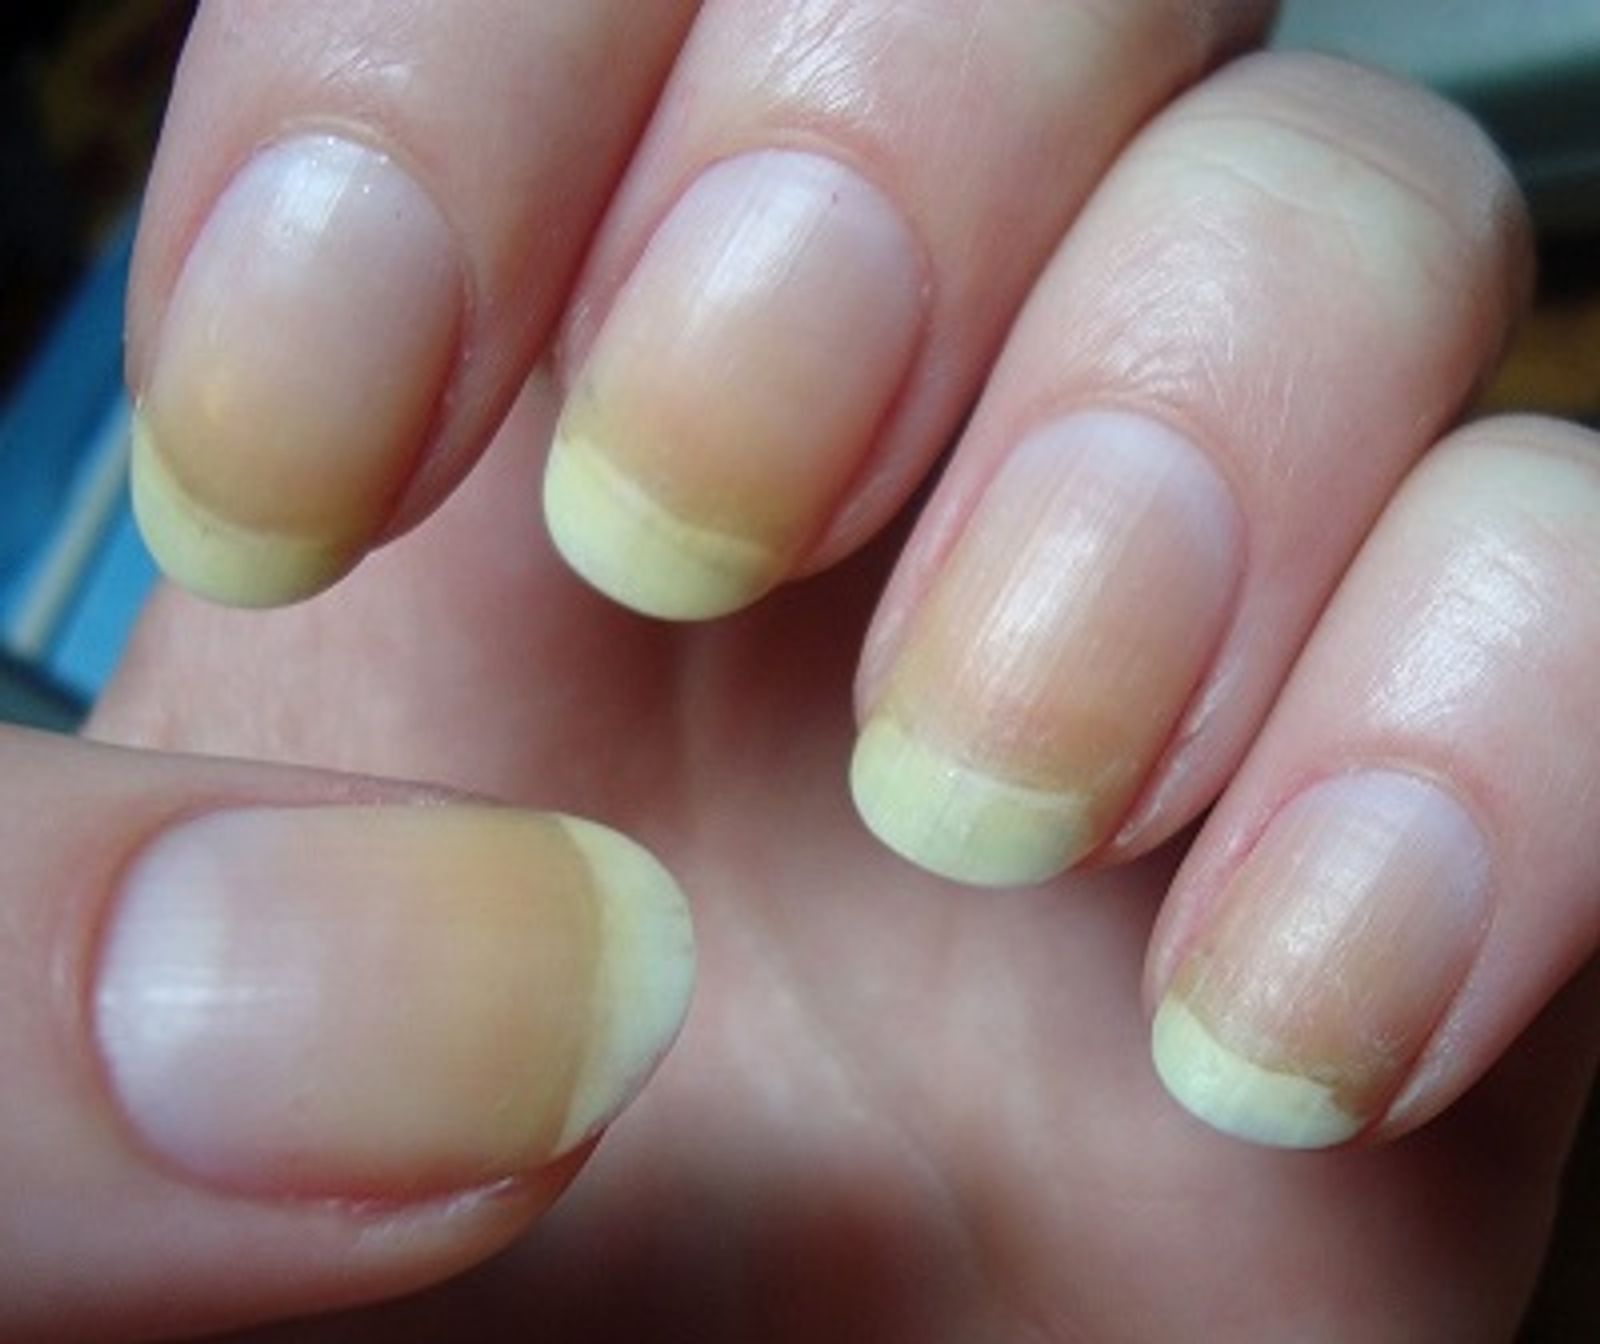 Tips for Beautiful Nails